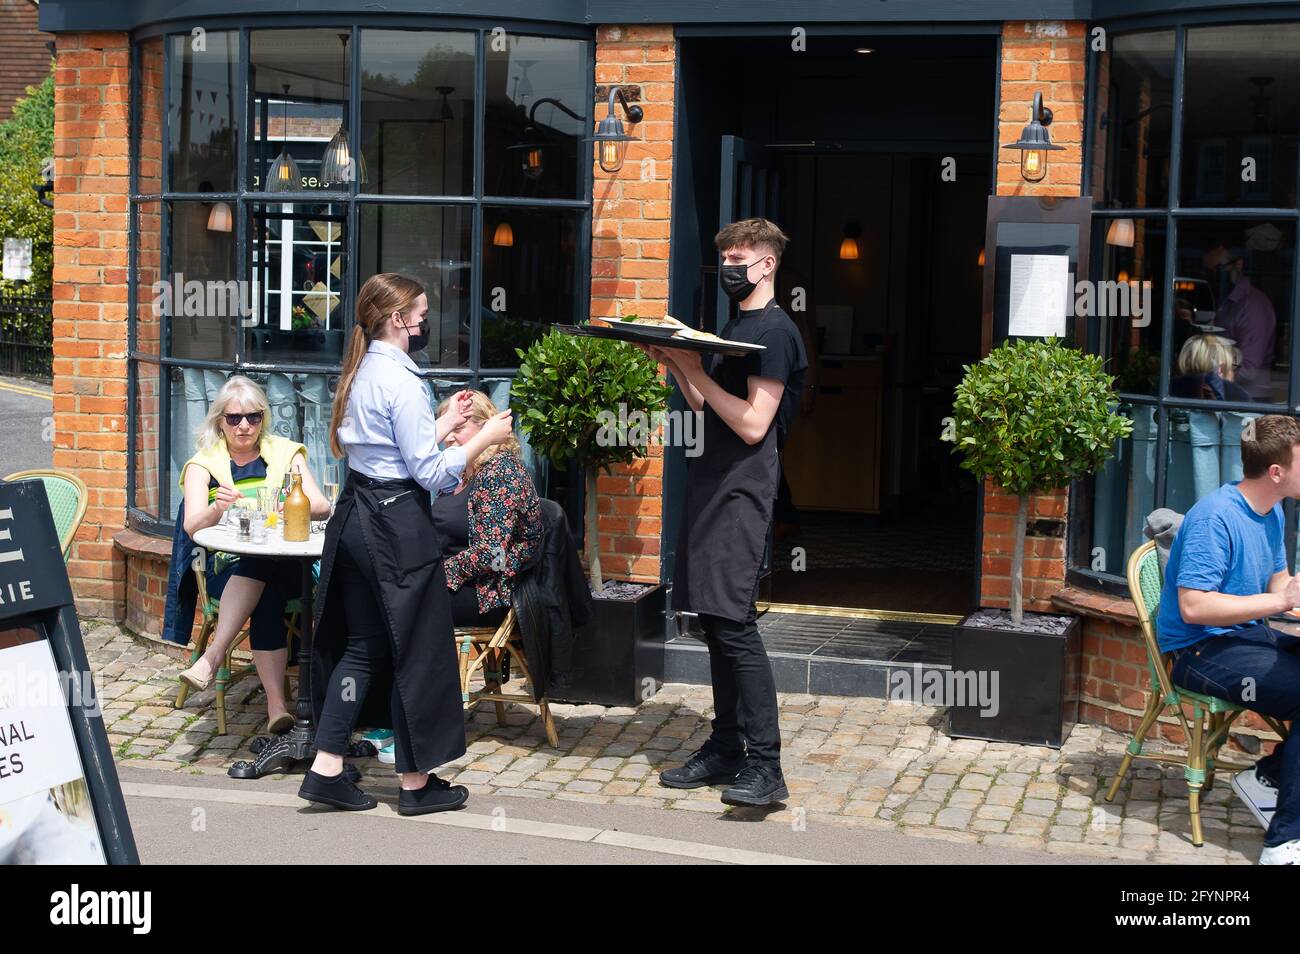 Old Amersham, Buckinghamshire, UK. 29th May, 2021. Customers enjoying a spot of lunch Al Fresco at Cote Brasserie. People were out enjoying the beautiful warm sunshine today in Amersham Old Town following the lifting of more of the Covid-19 restrictions. Credit: Maureen McLean/Alamy Live News Stock Photo